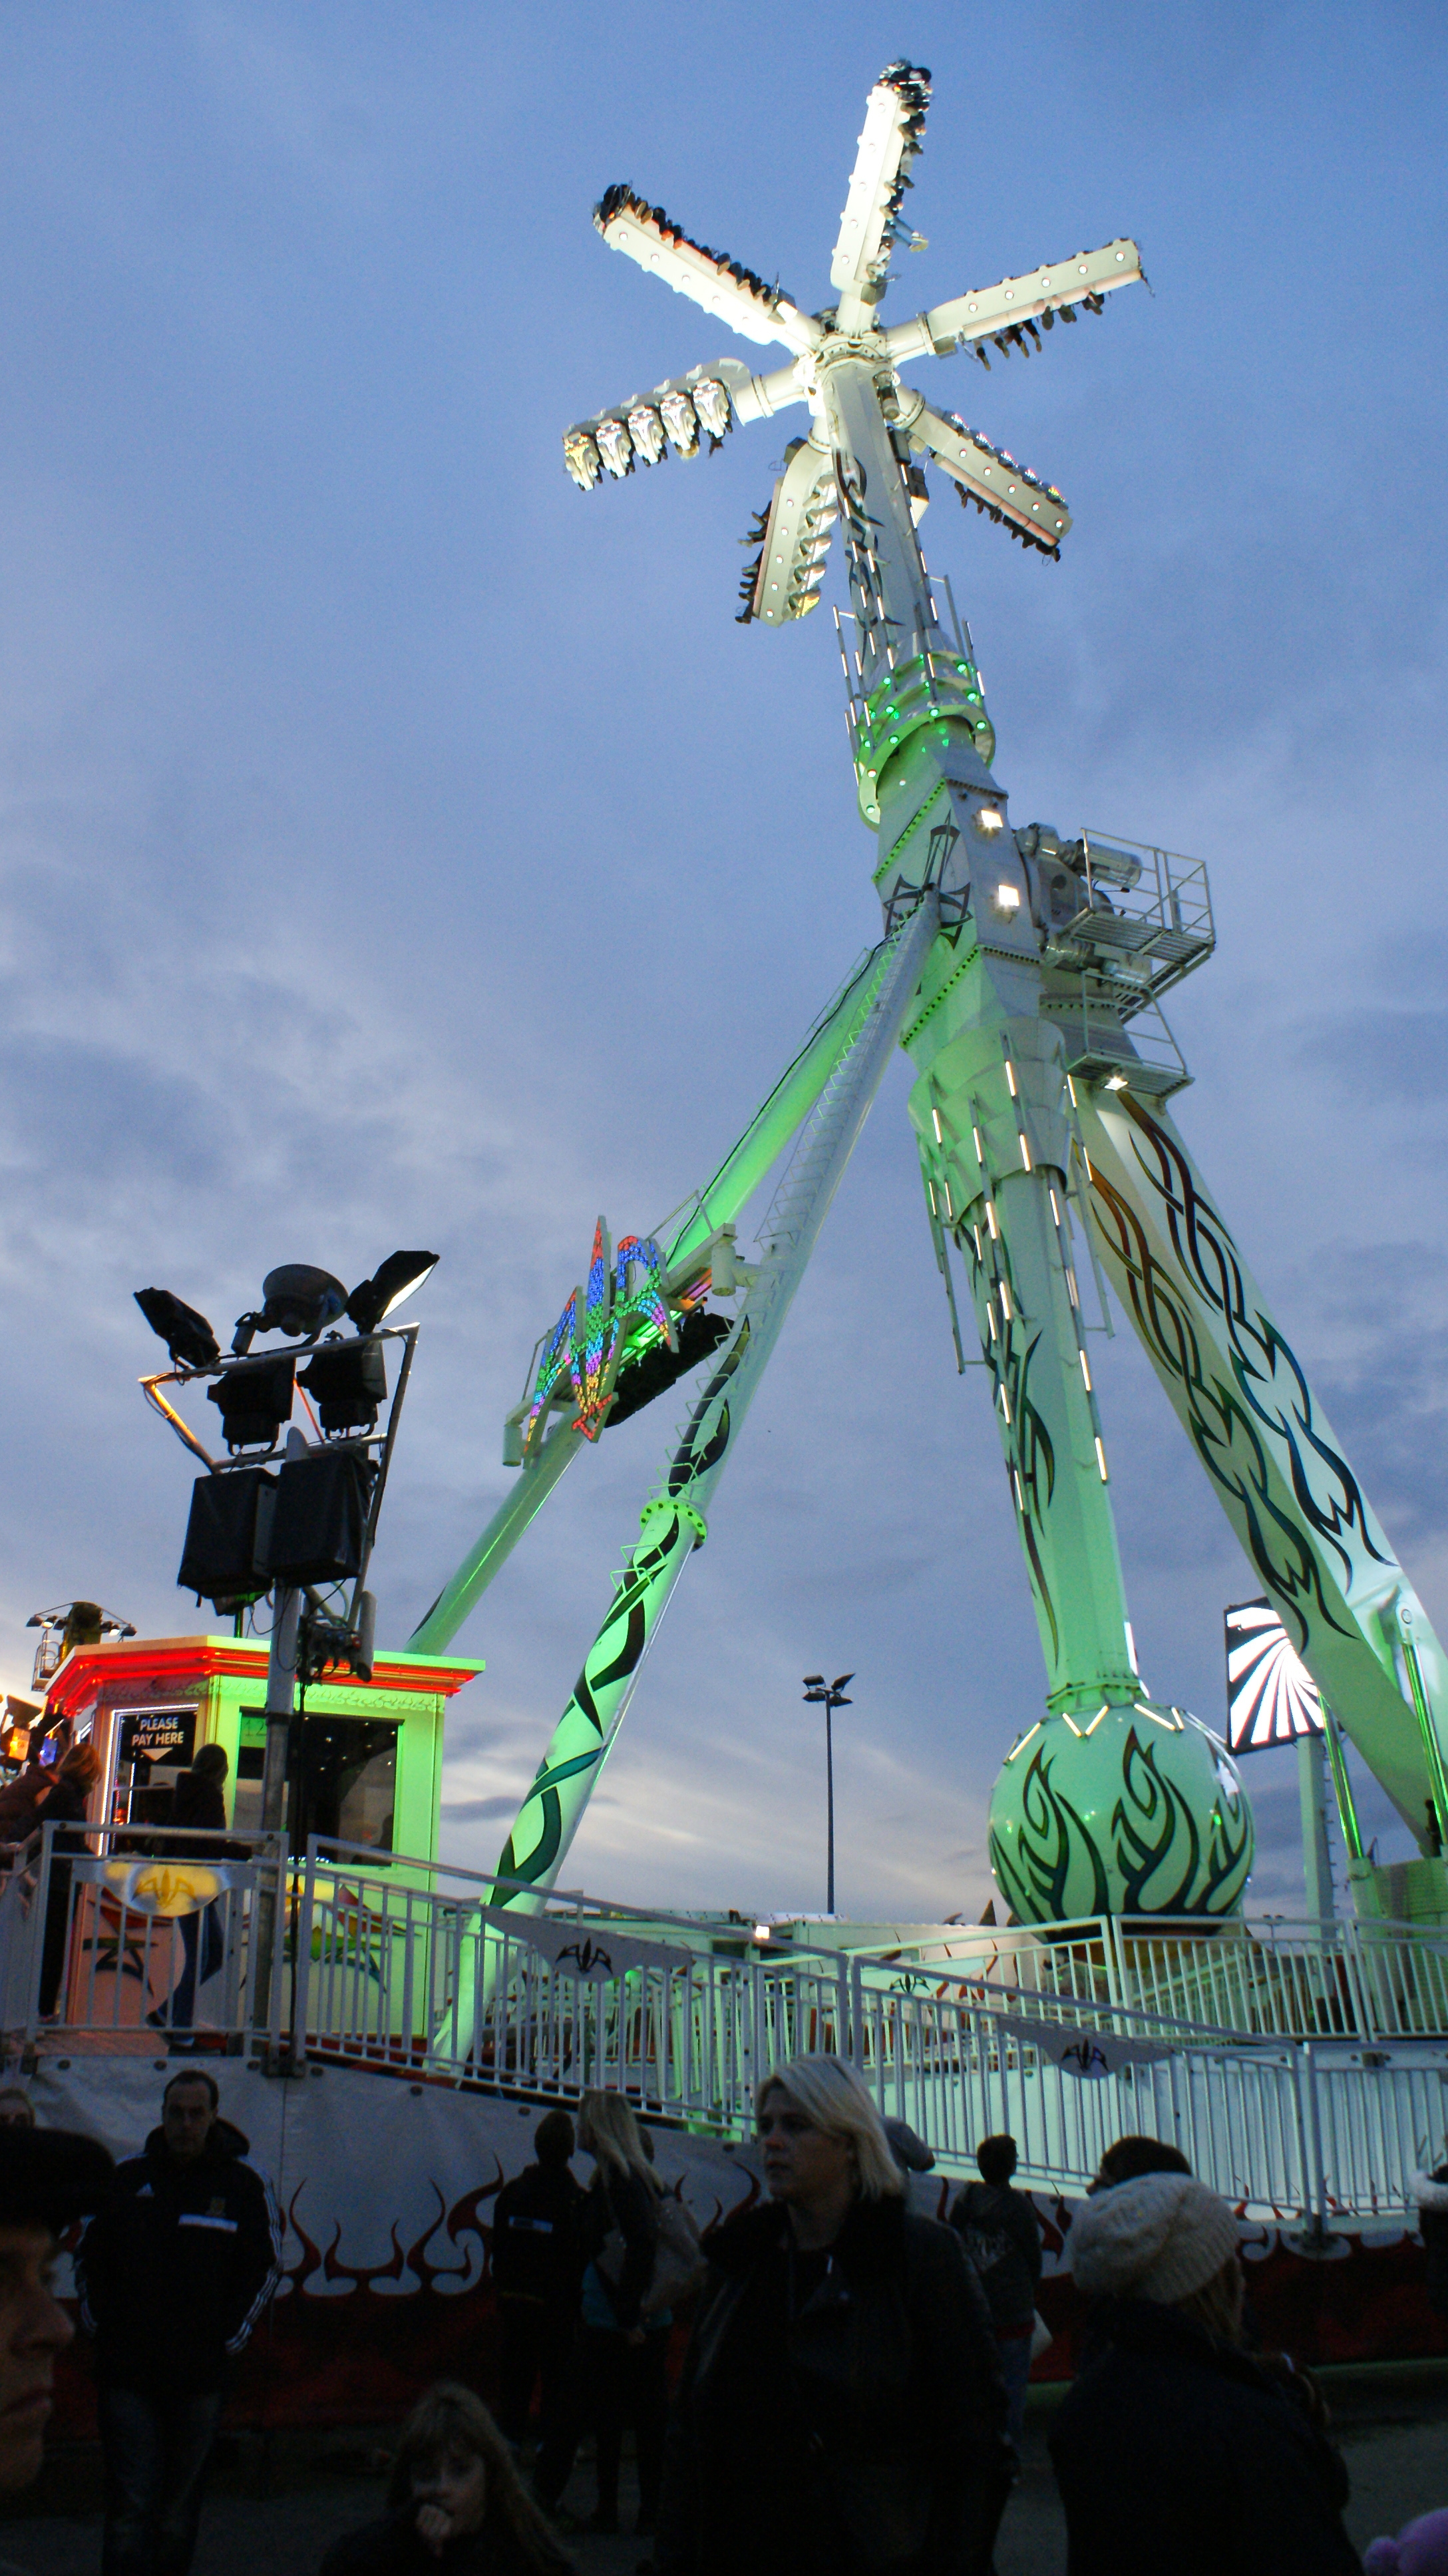 Danter Attractions AIR, dominating the sky line at Hull Fair